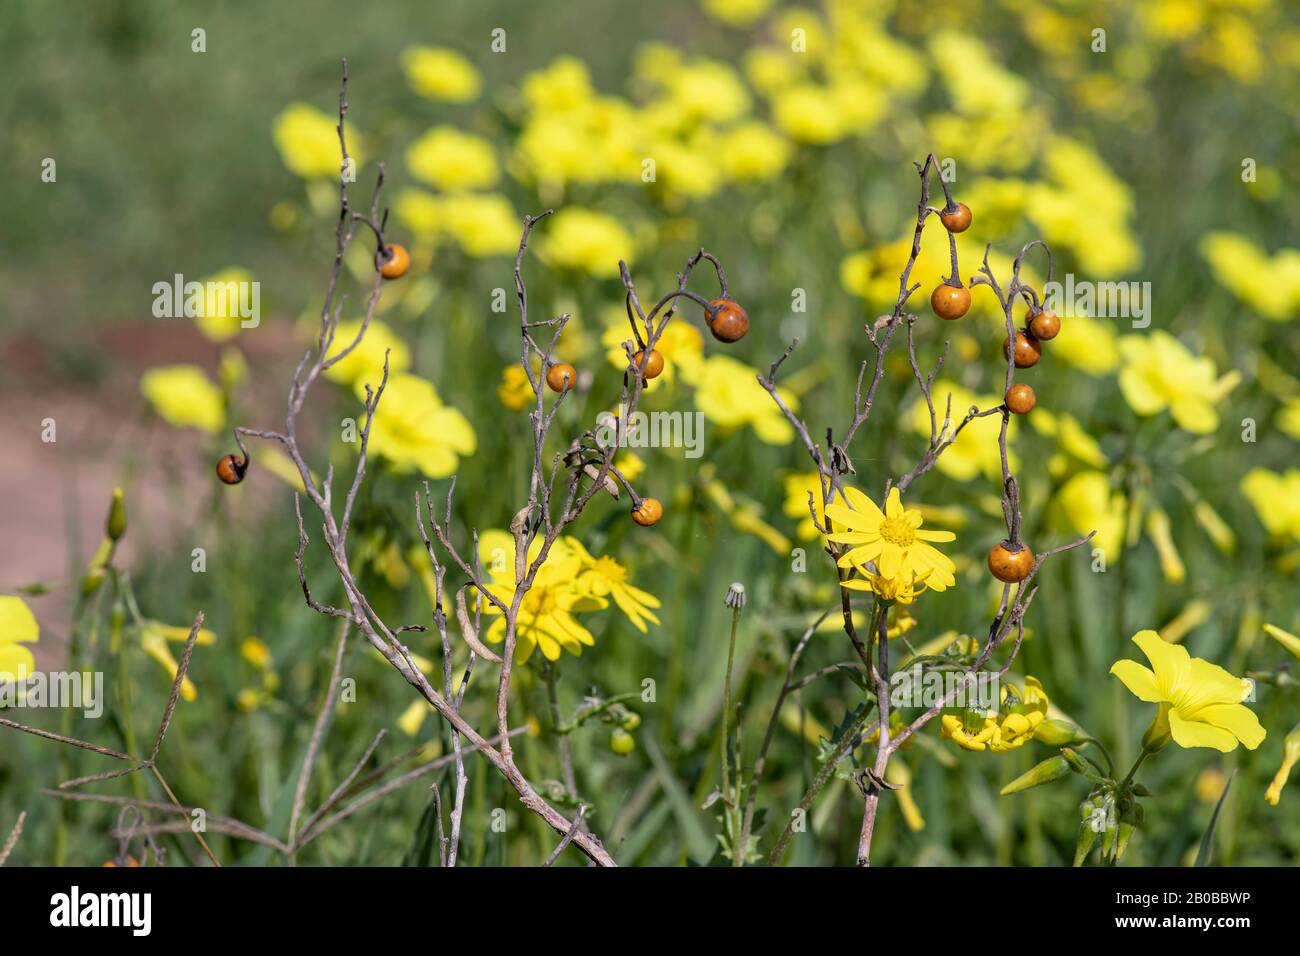 Dry twigs with berries on a background of a field with blooming yellow flowers close up Stock Photo